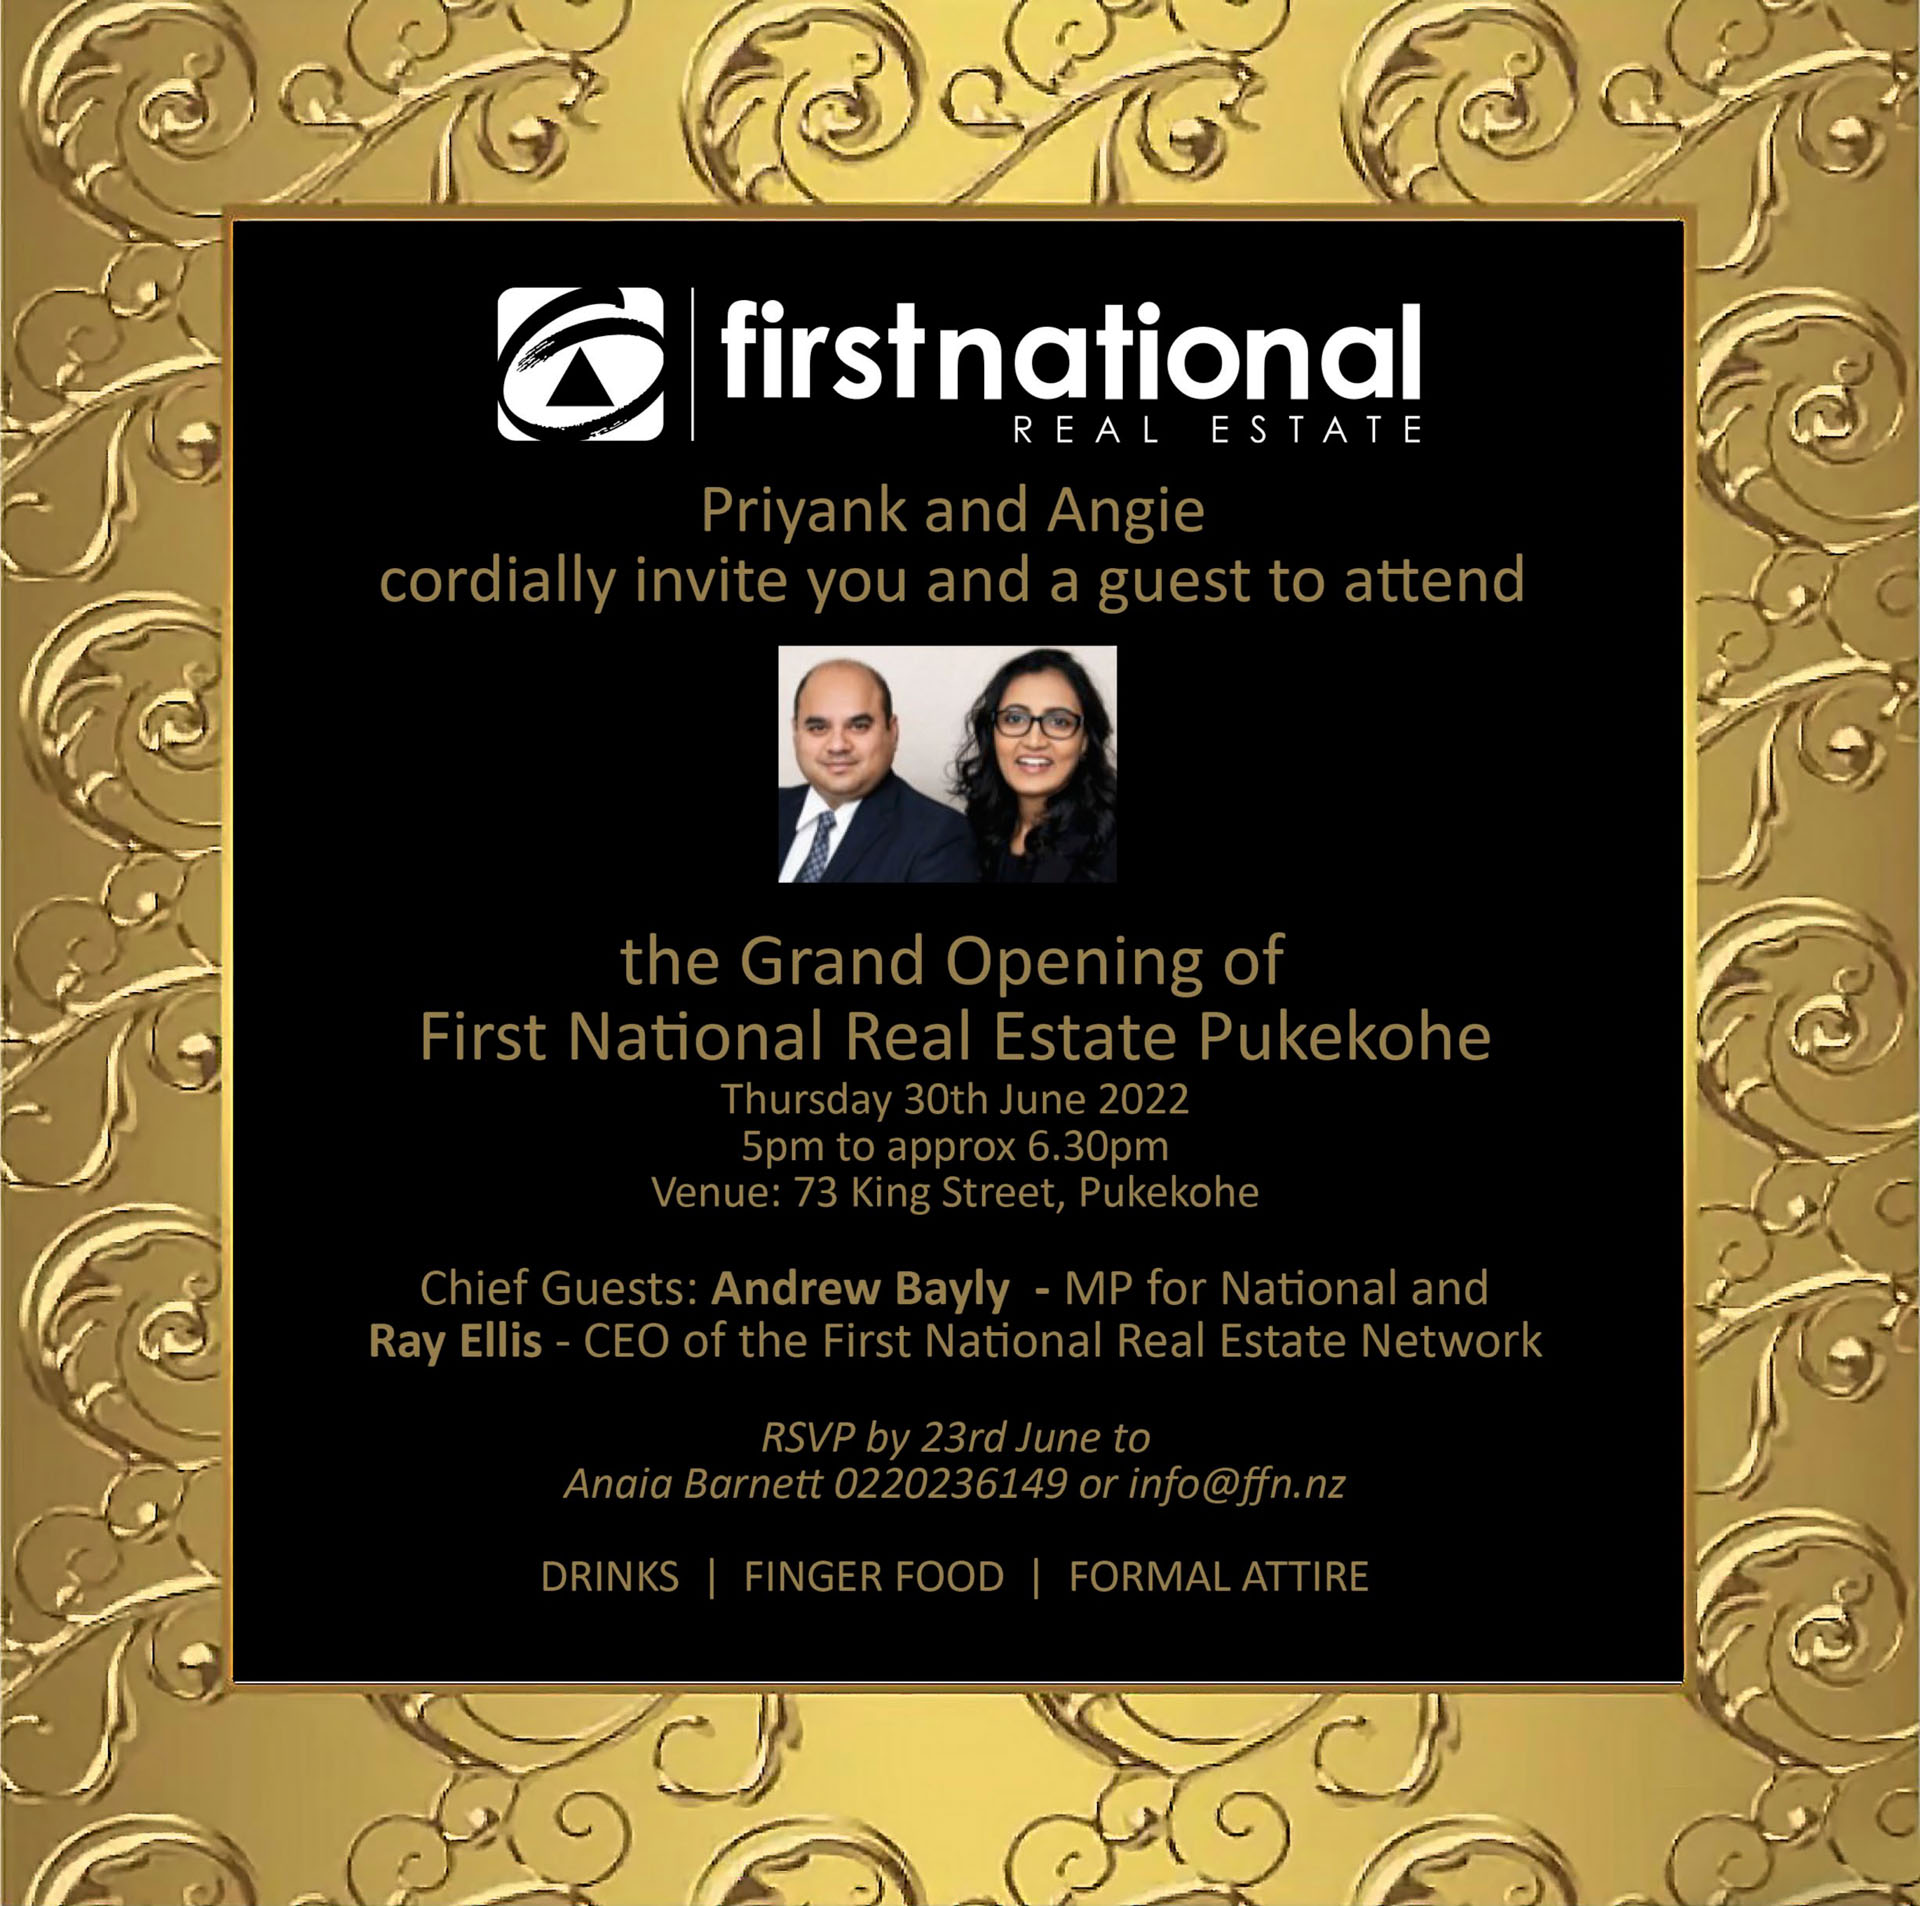 You’re invited to the opening of First National Real Estate in Pukekohe!